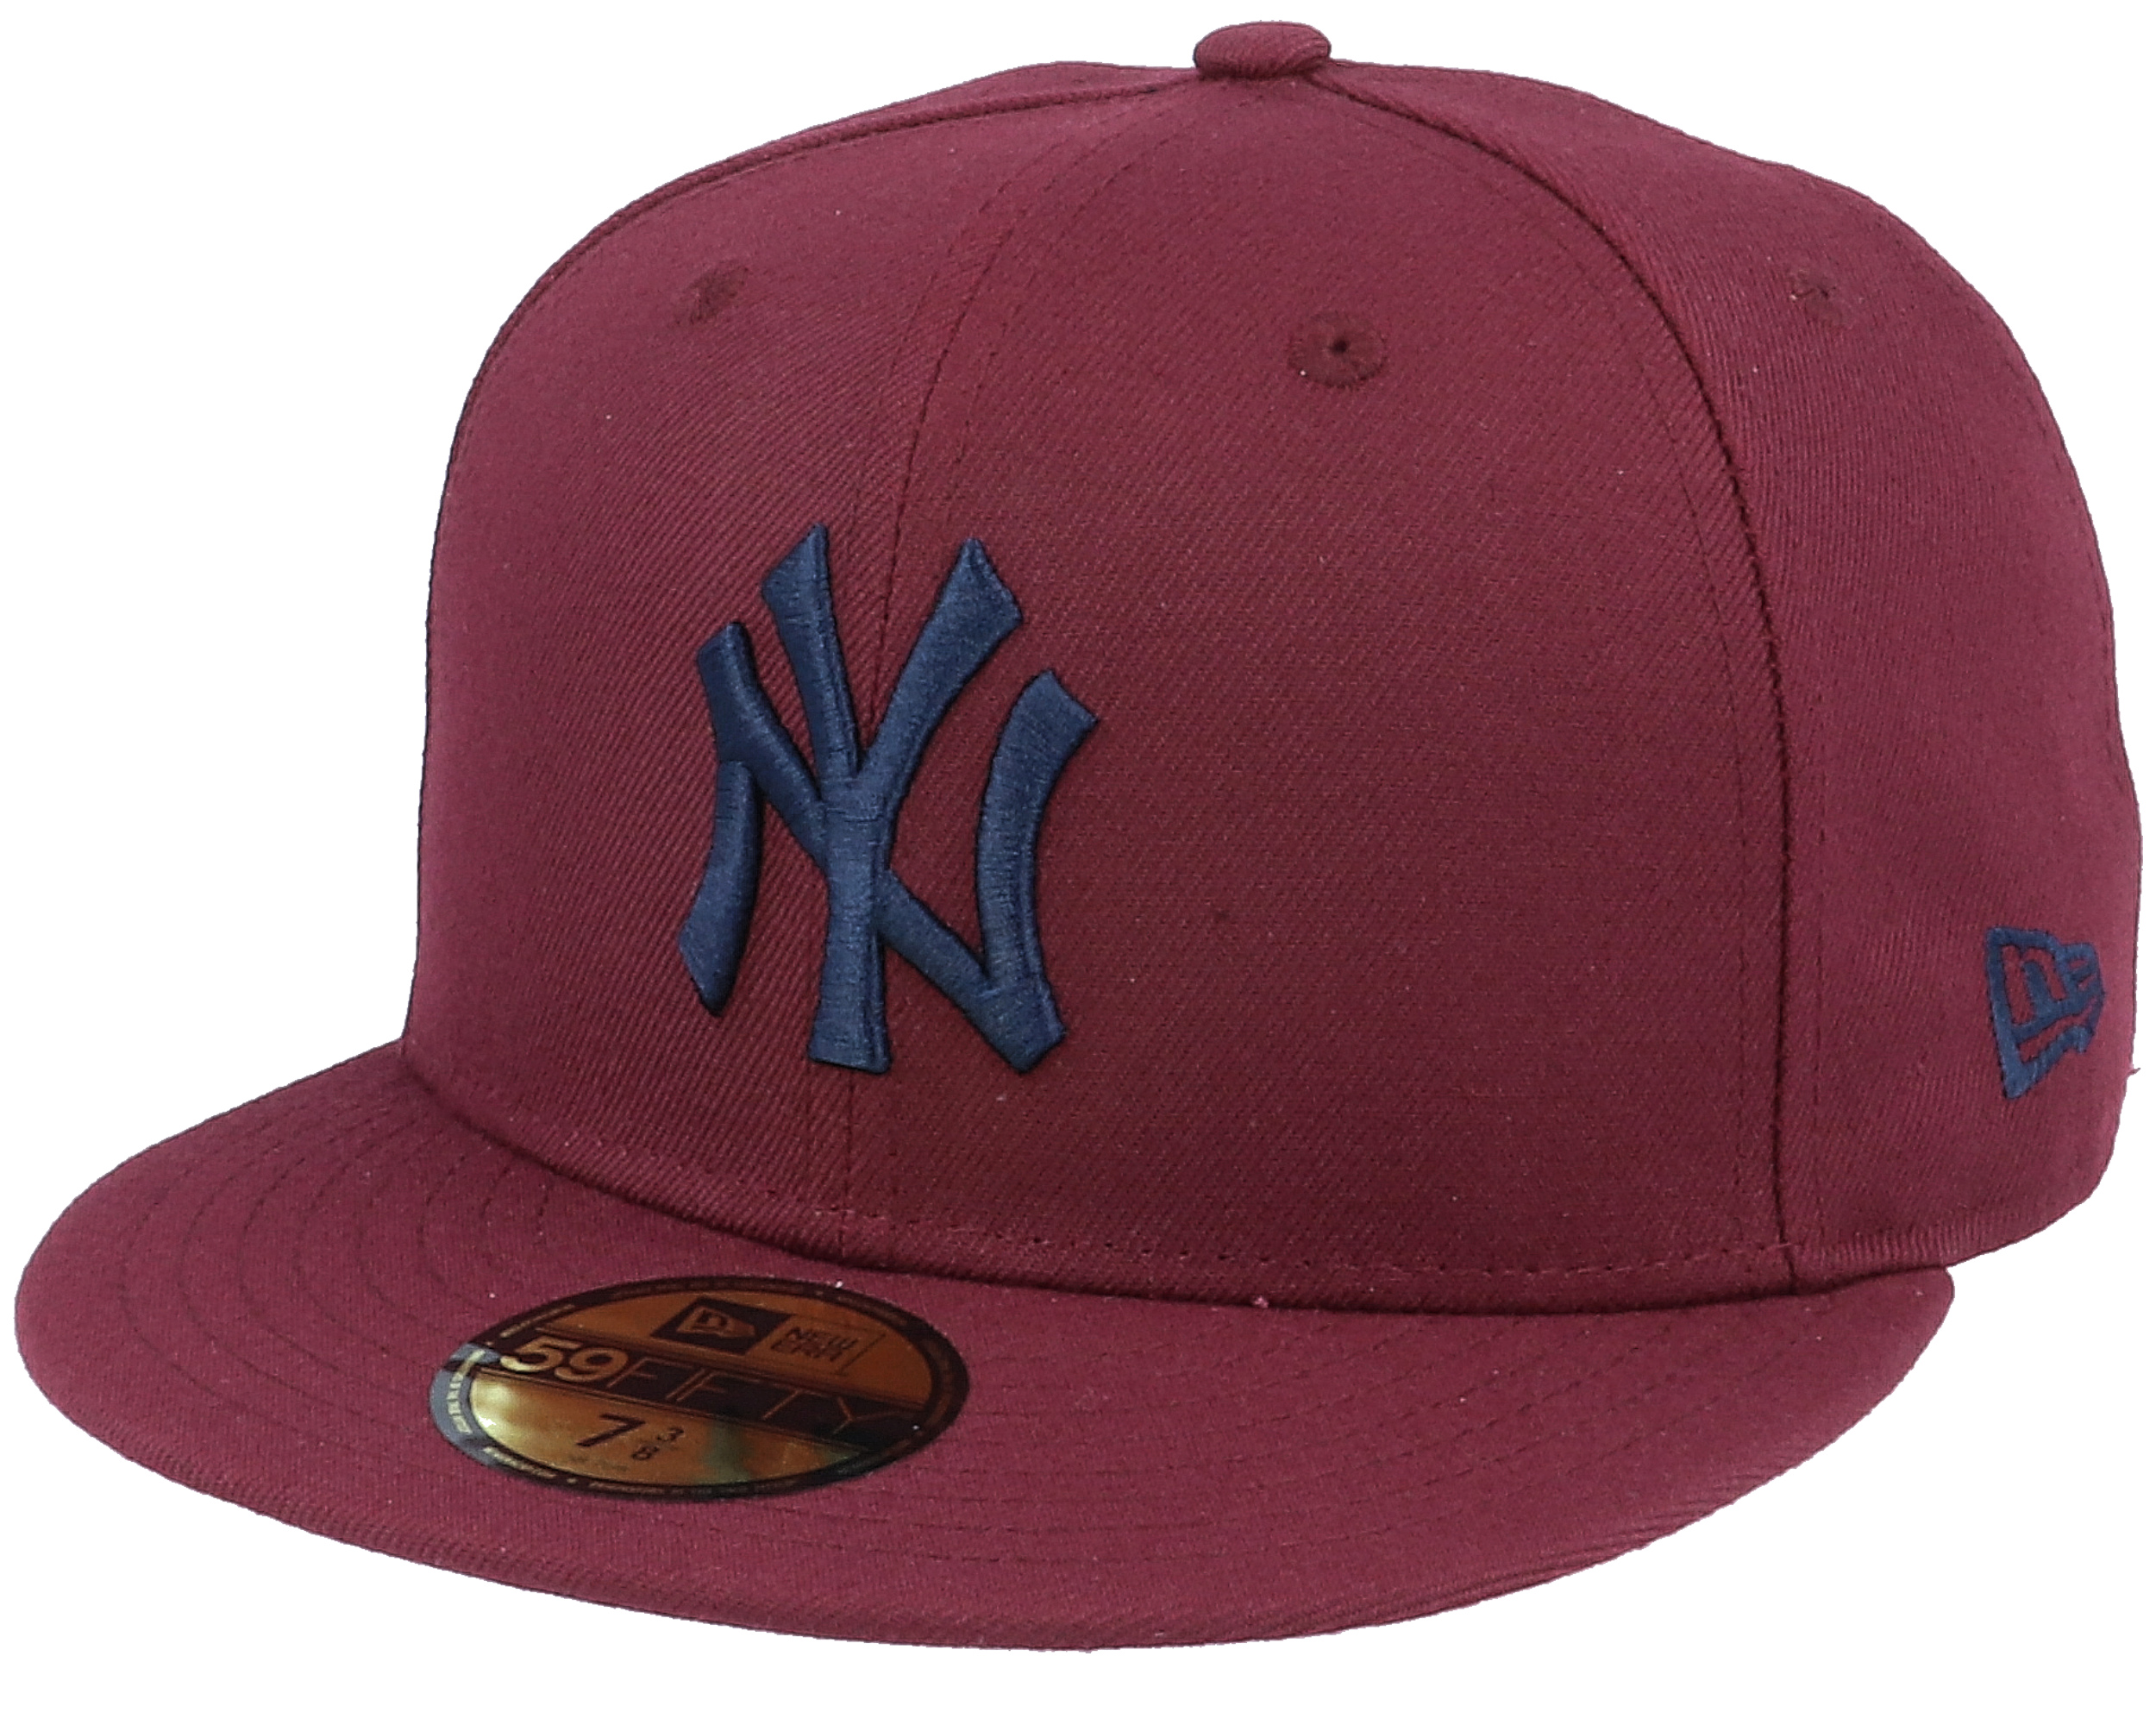 New York Yankees Mlb 59Fifty Maroon/Navy Fitted - New Era caps ...